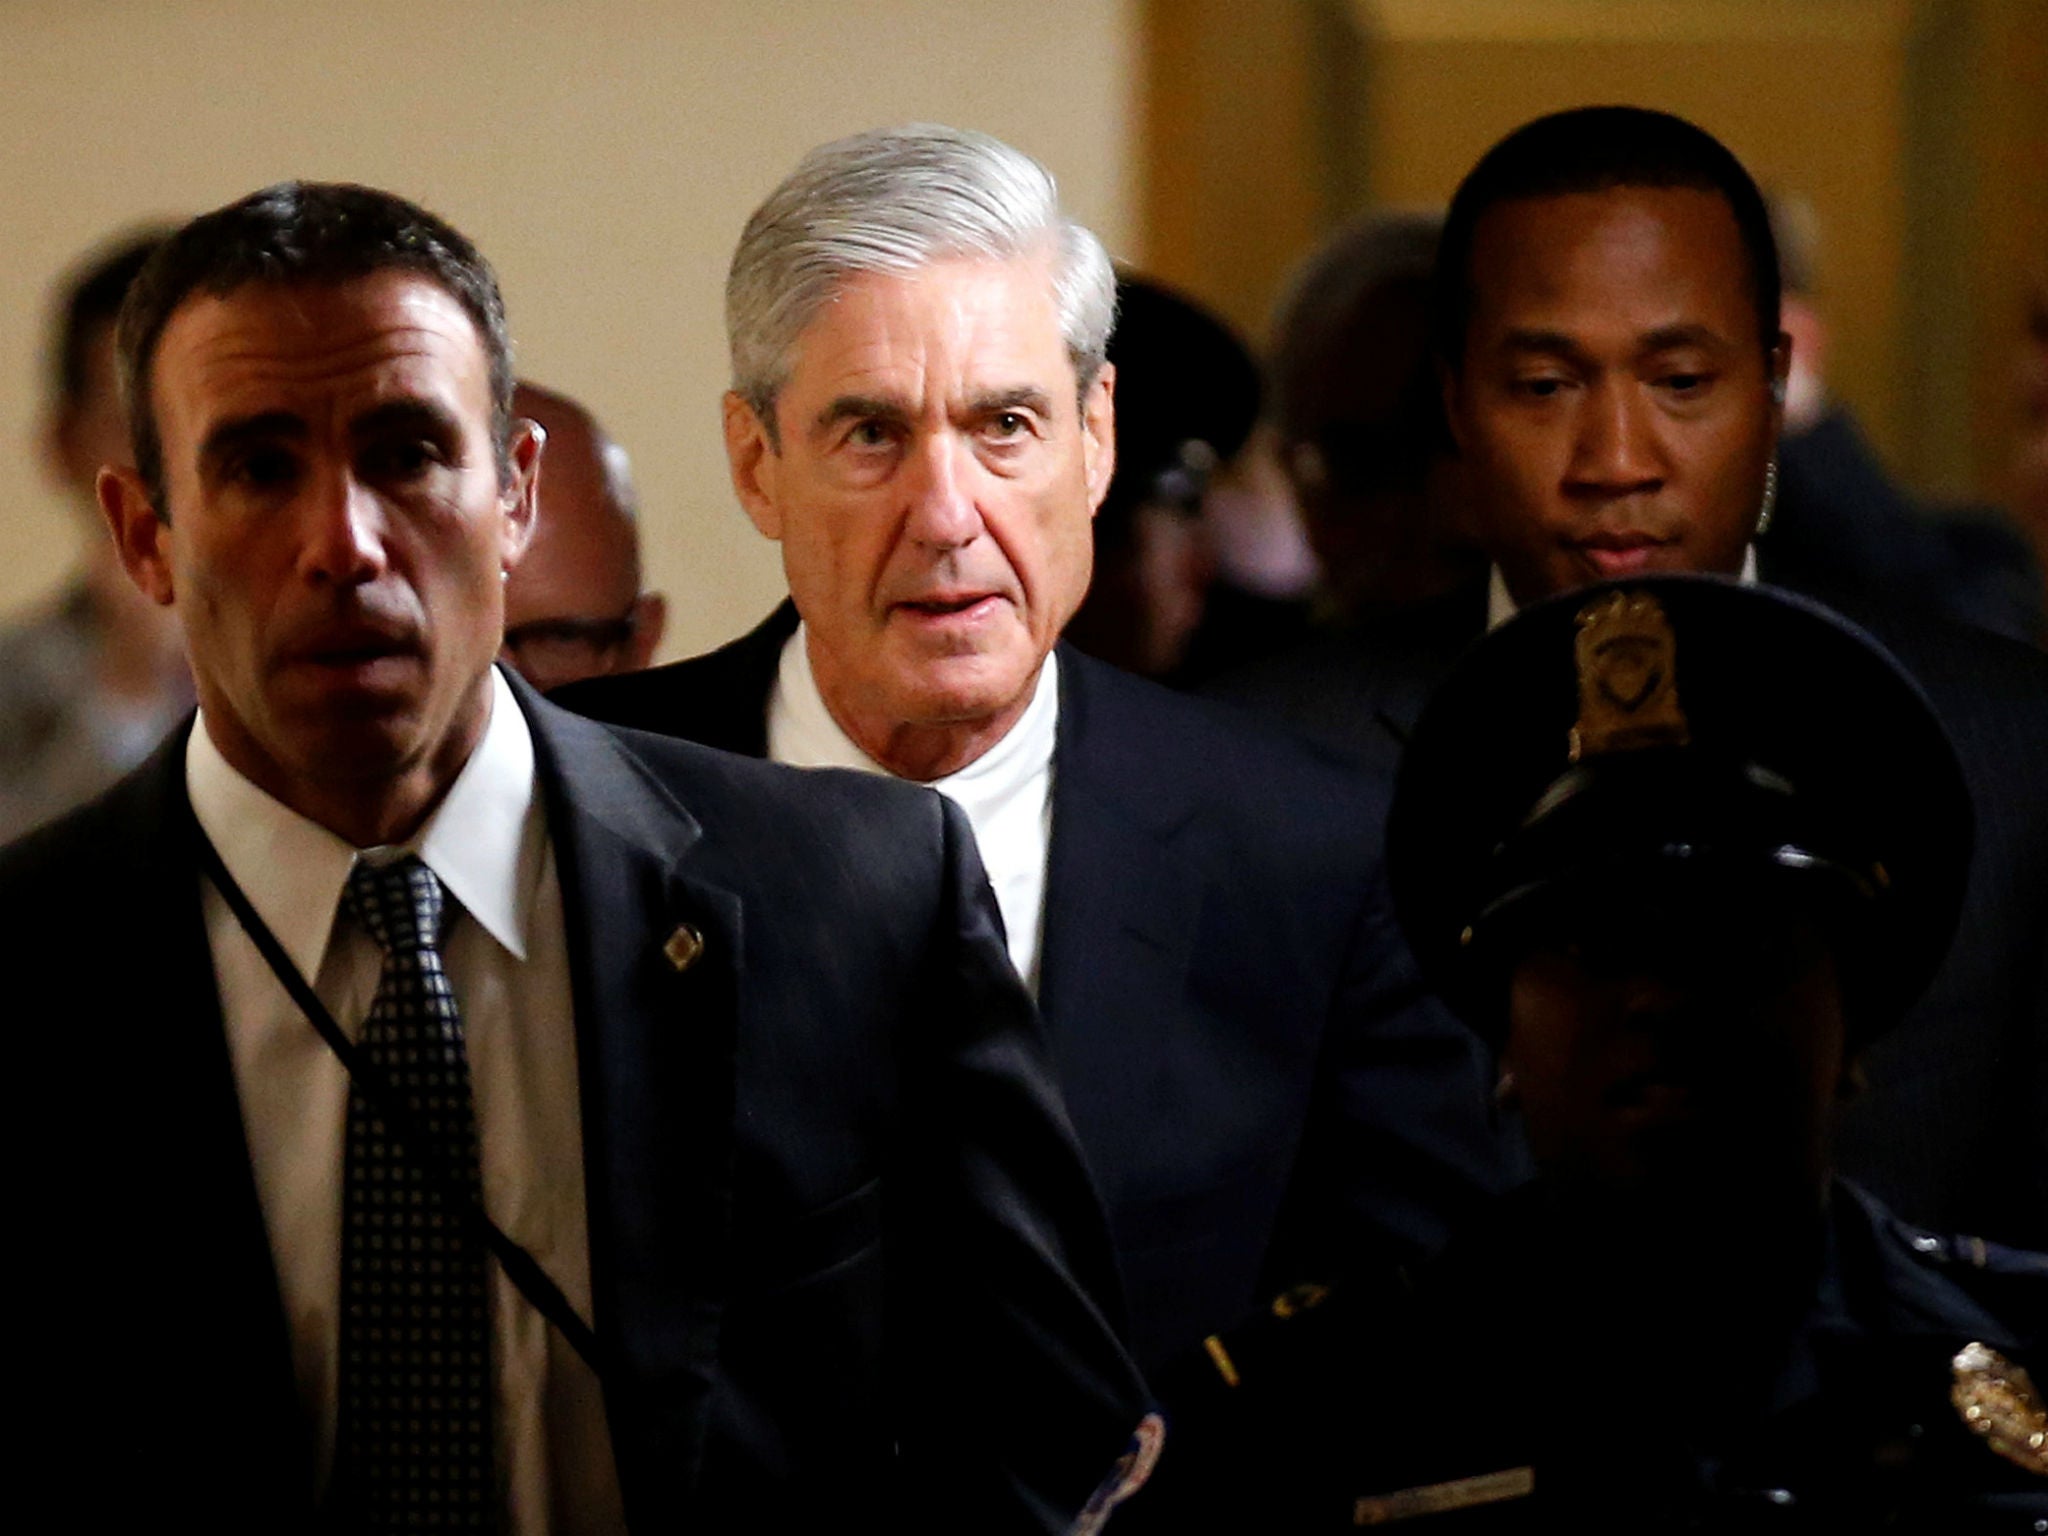 Special Counsel Robert Mueller, seen here on Capitol Hill in Washington on June 21, 2017, is facing augmented criticism from Republicans